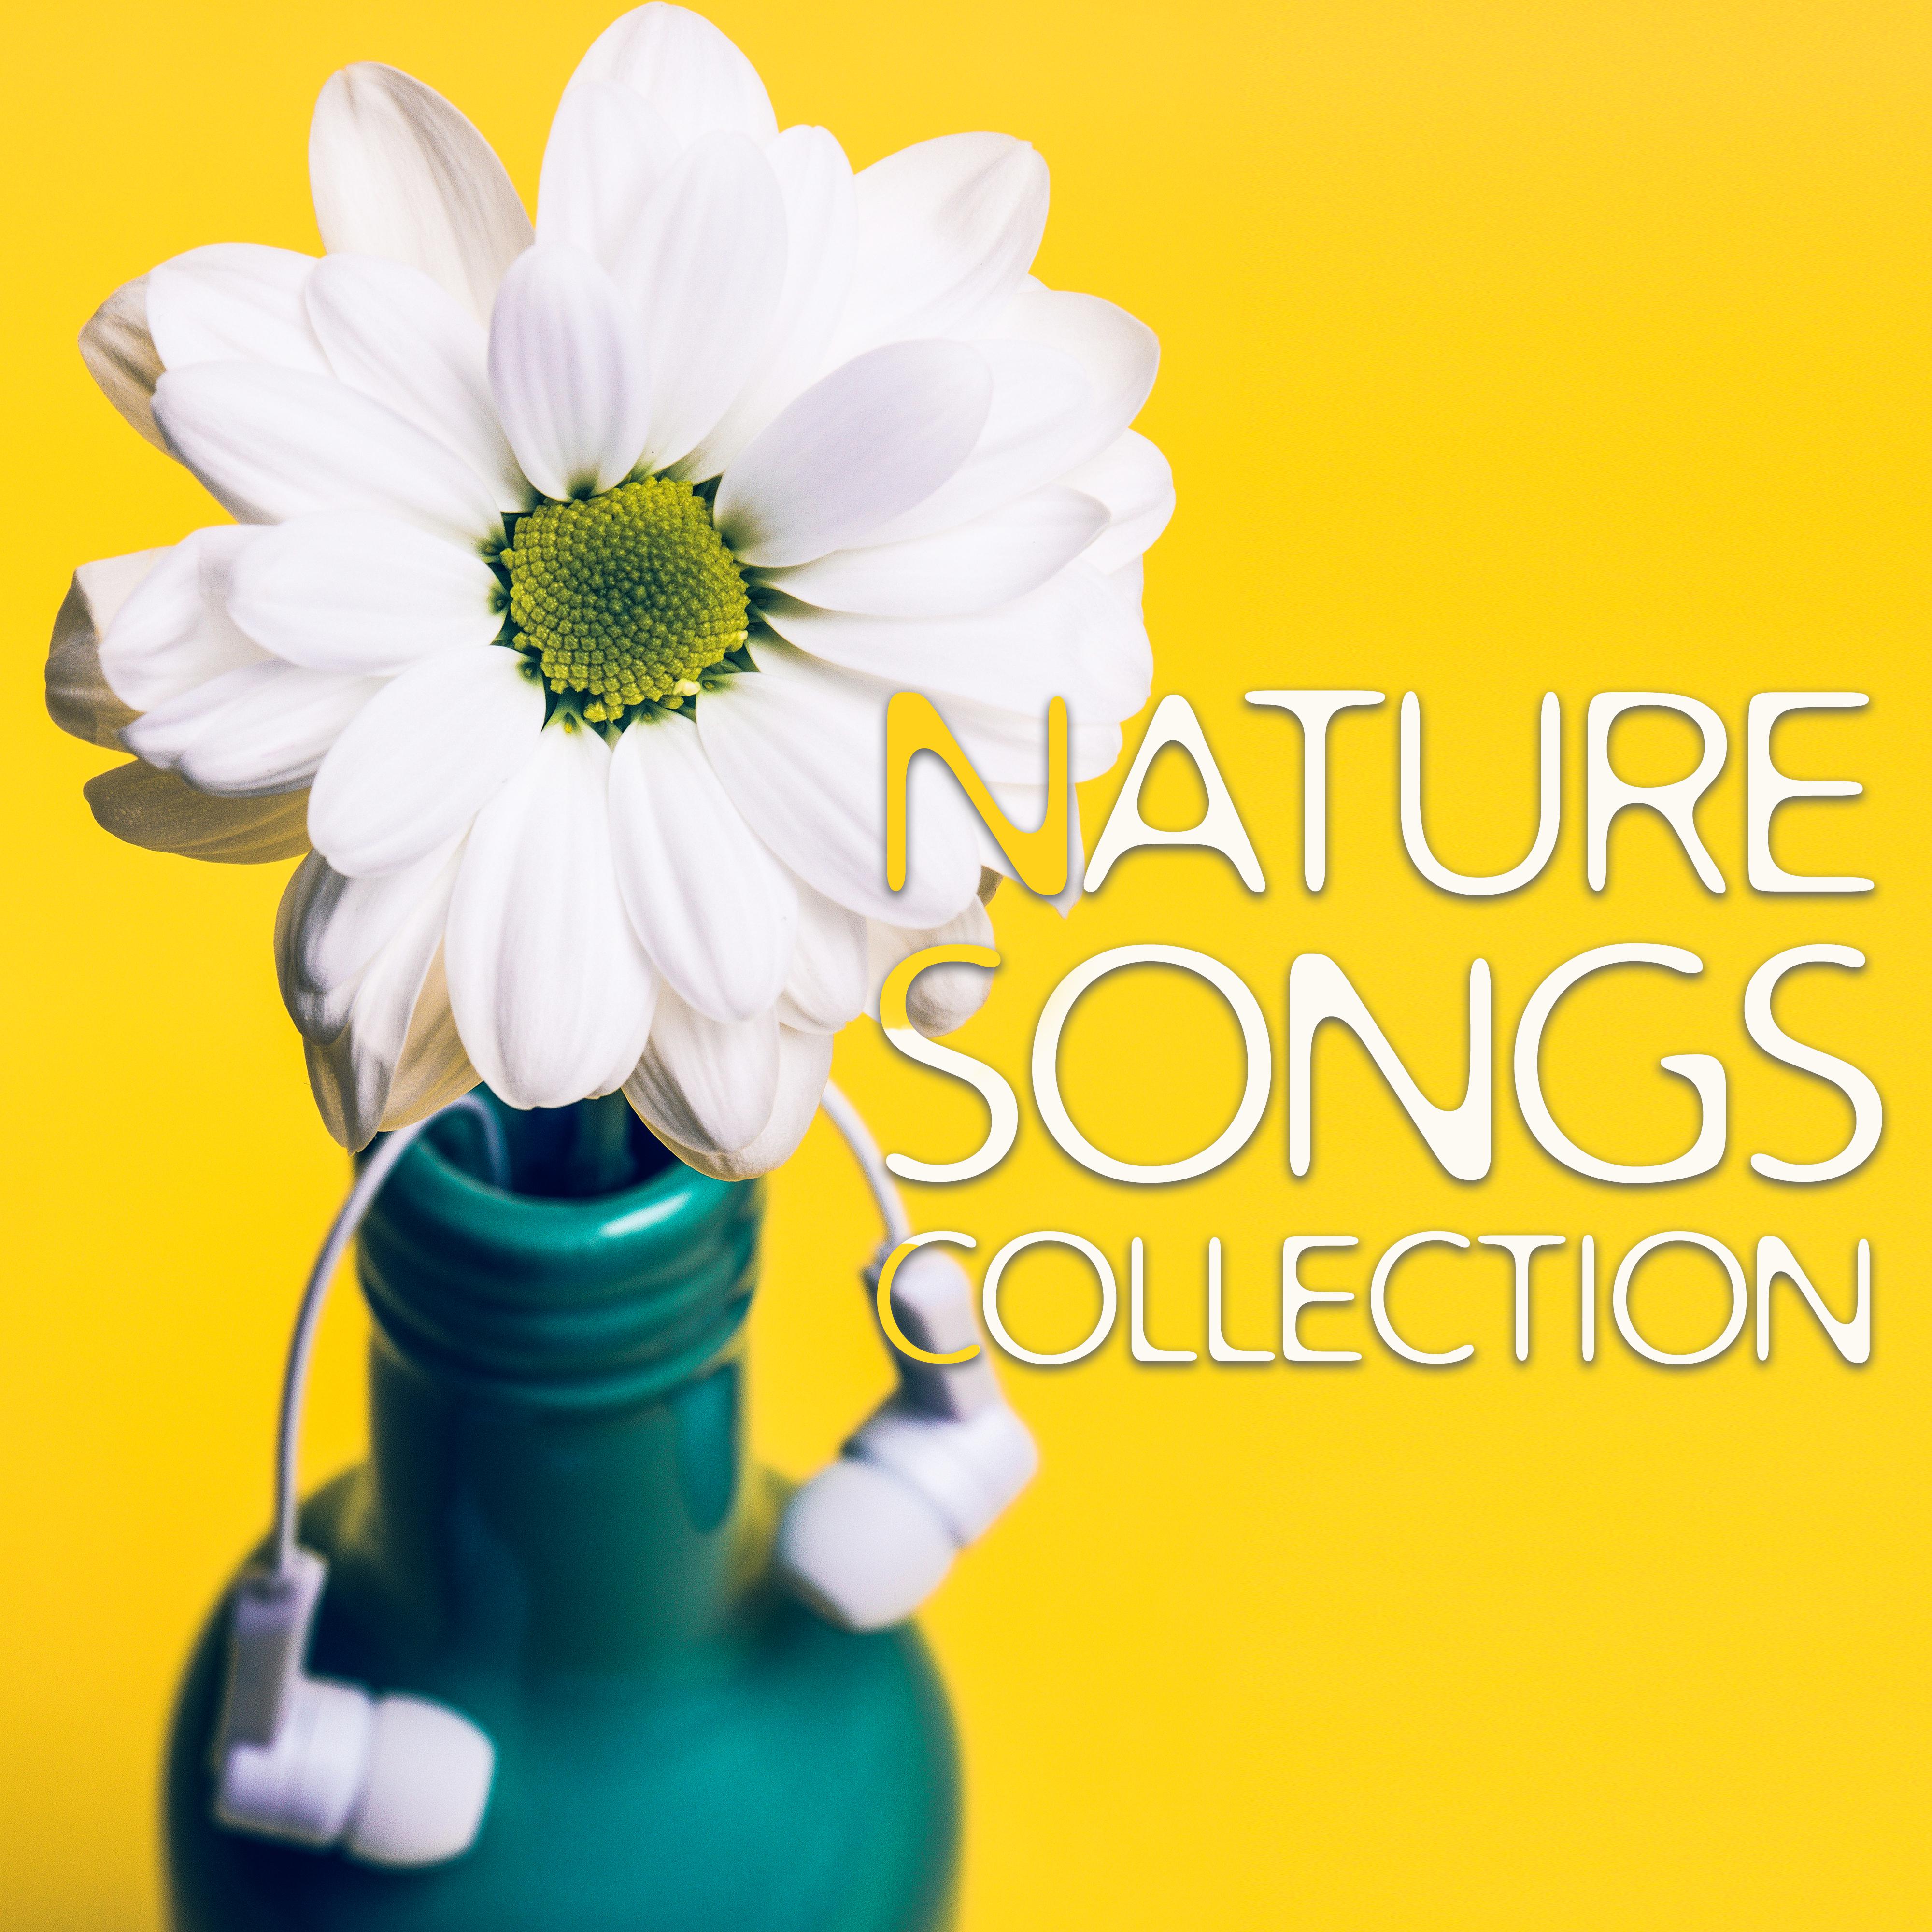 Nature Songs Collection  Relaxing Music,  Massage Therapy, Spa, Wellness, Zen, Bliss, Rest